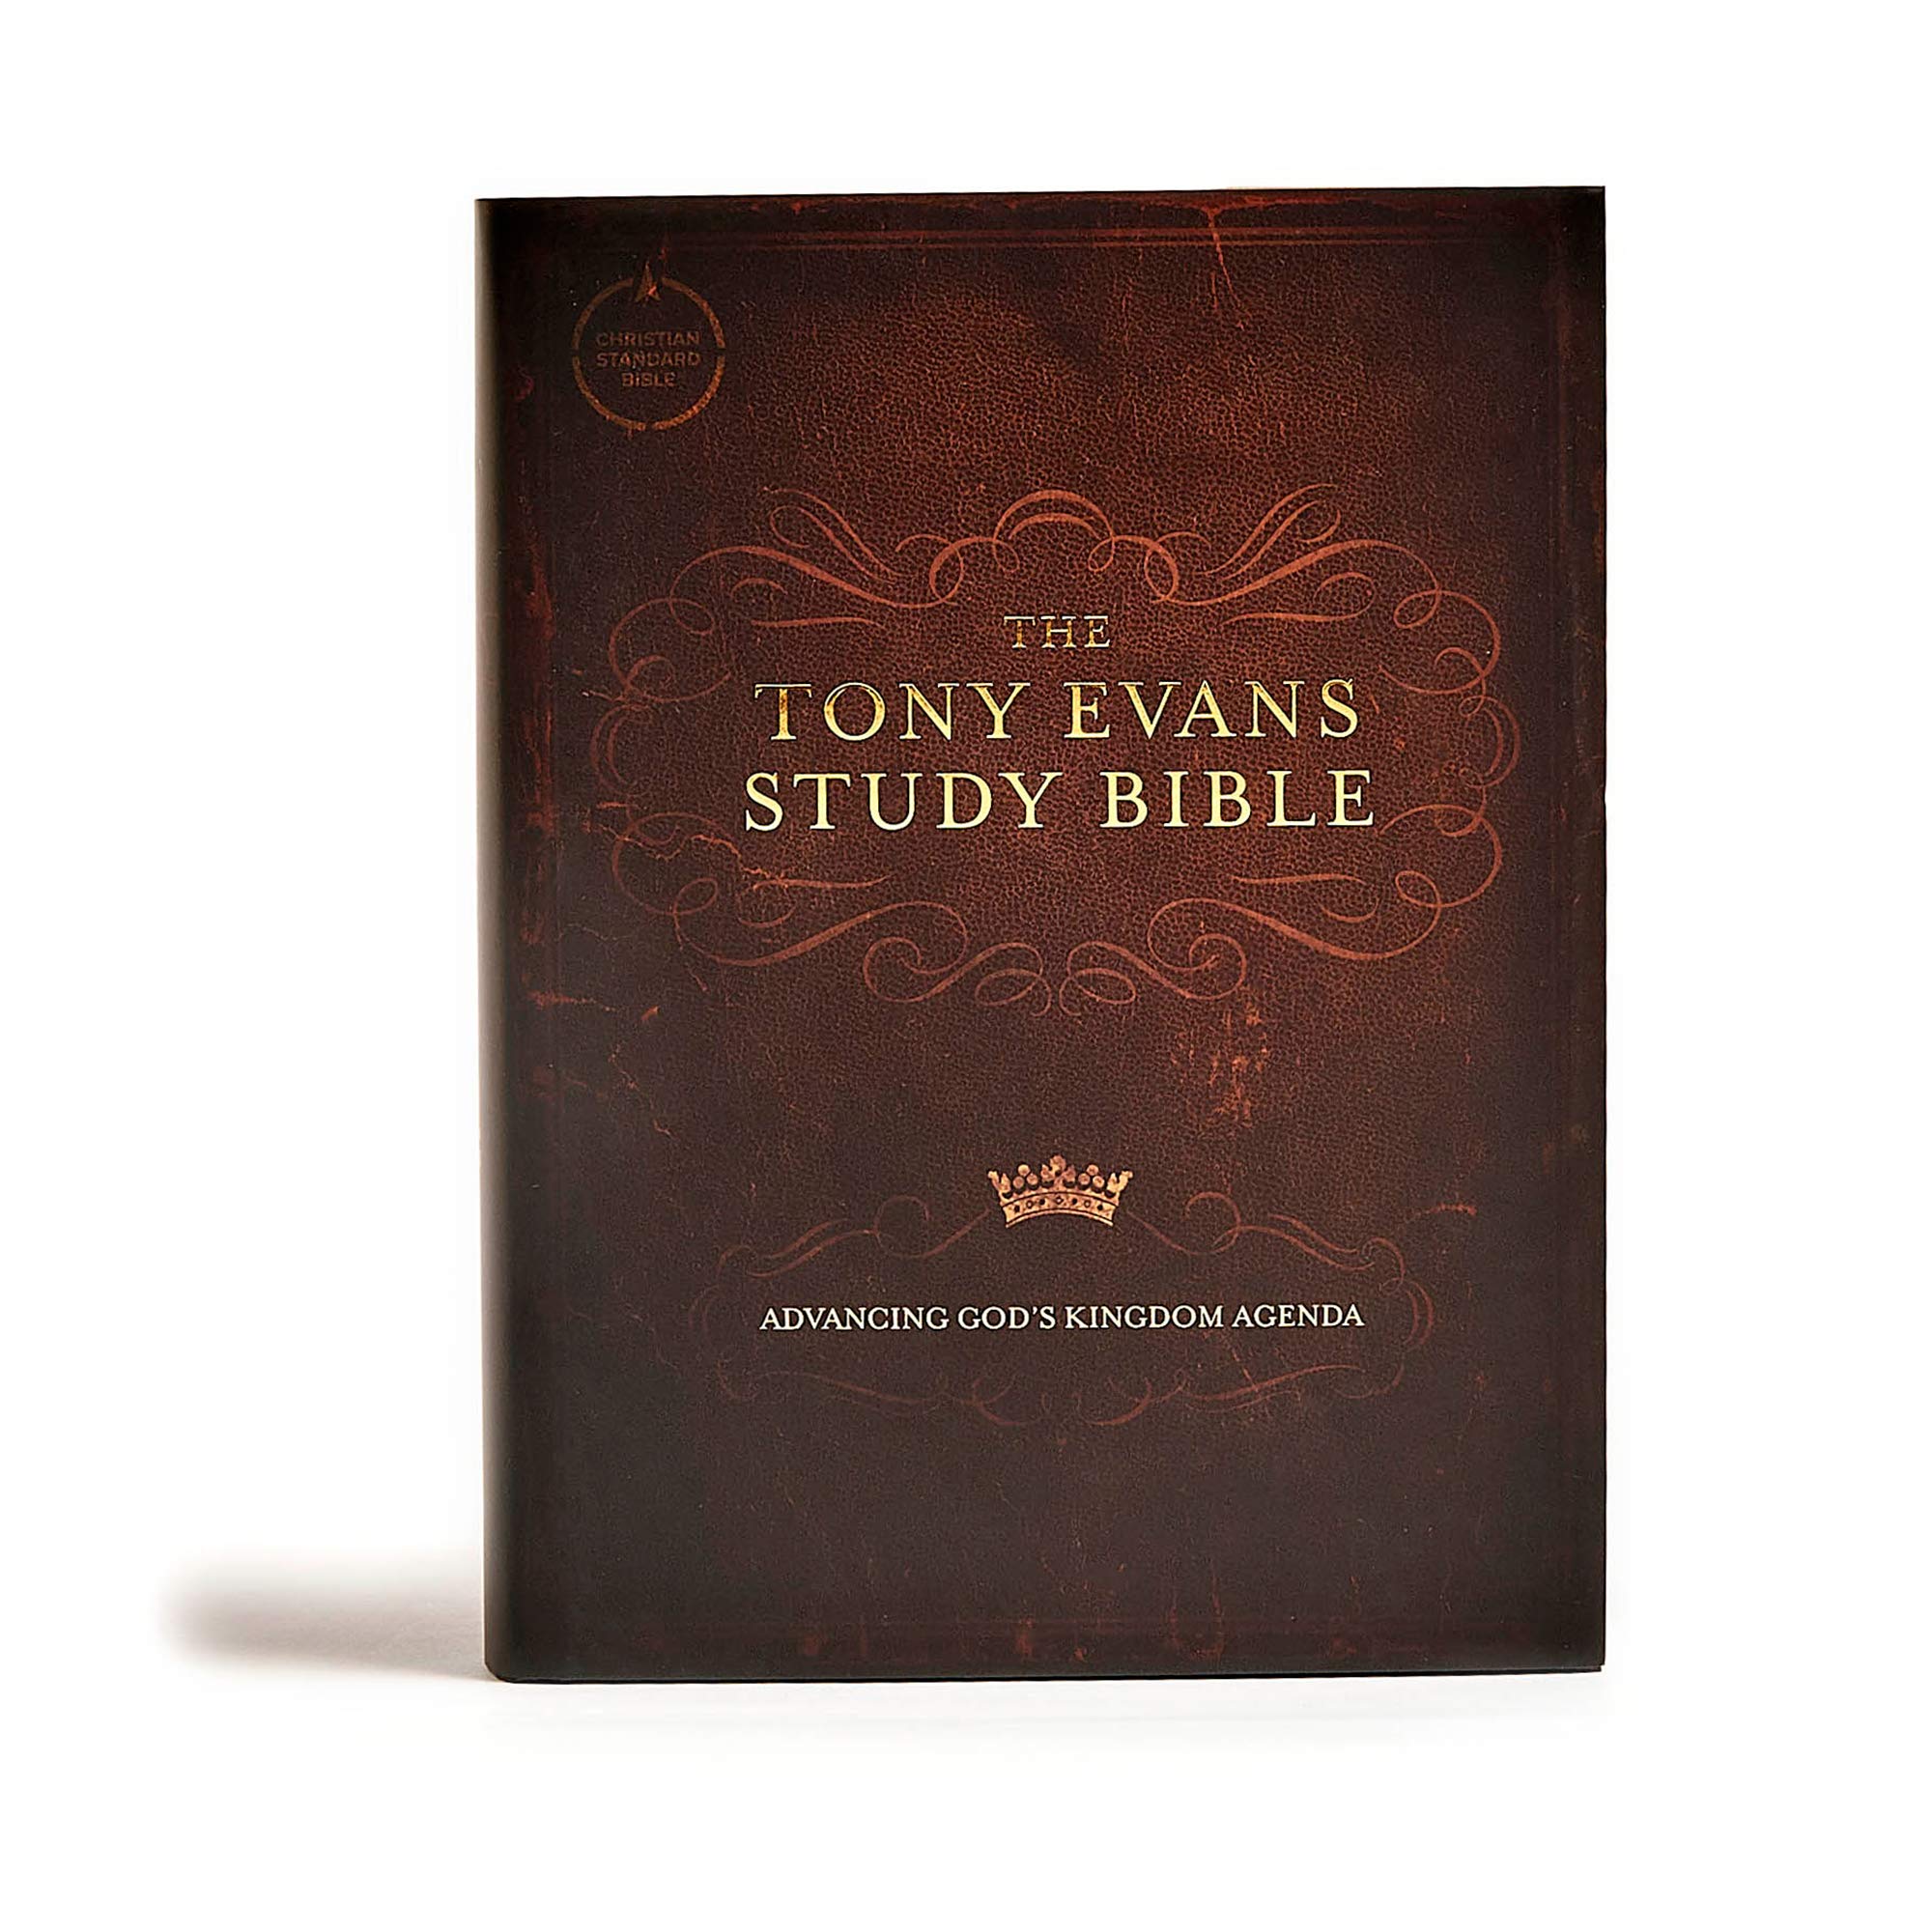 CSB Tony Evans Study Bible, Hardcover: Study Notes and Commentary, Articles, Videos, Easy-To-Read Font by Evans, Tony